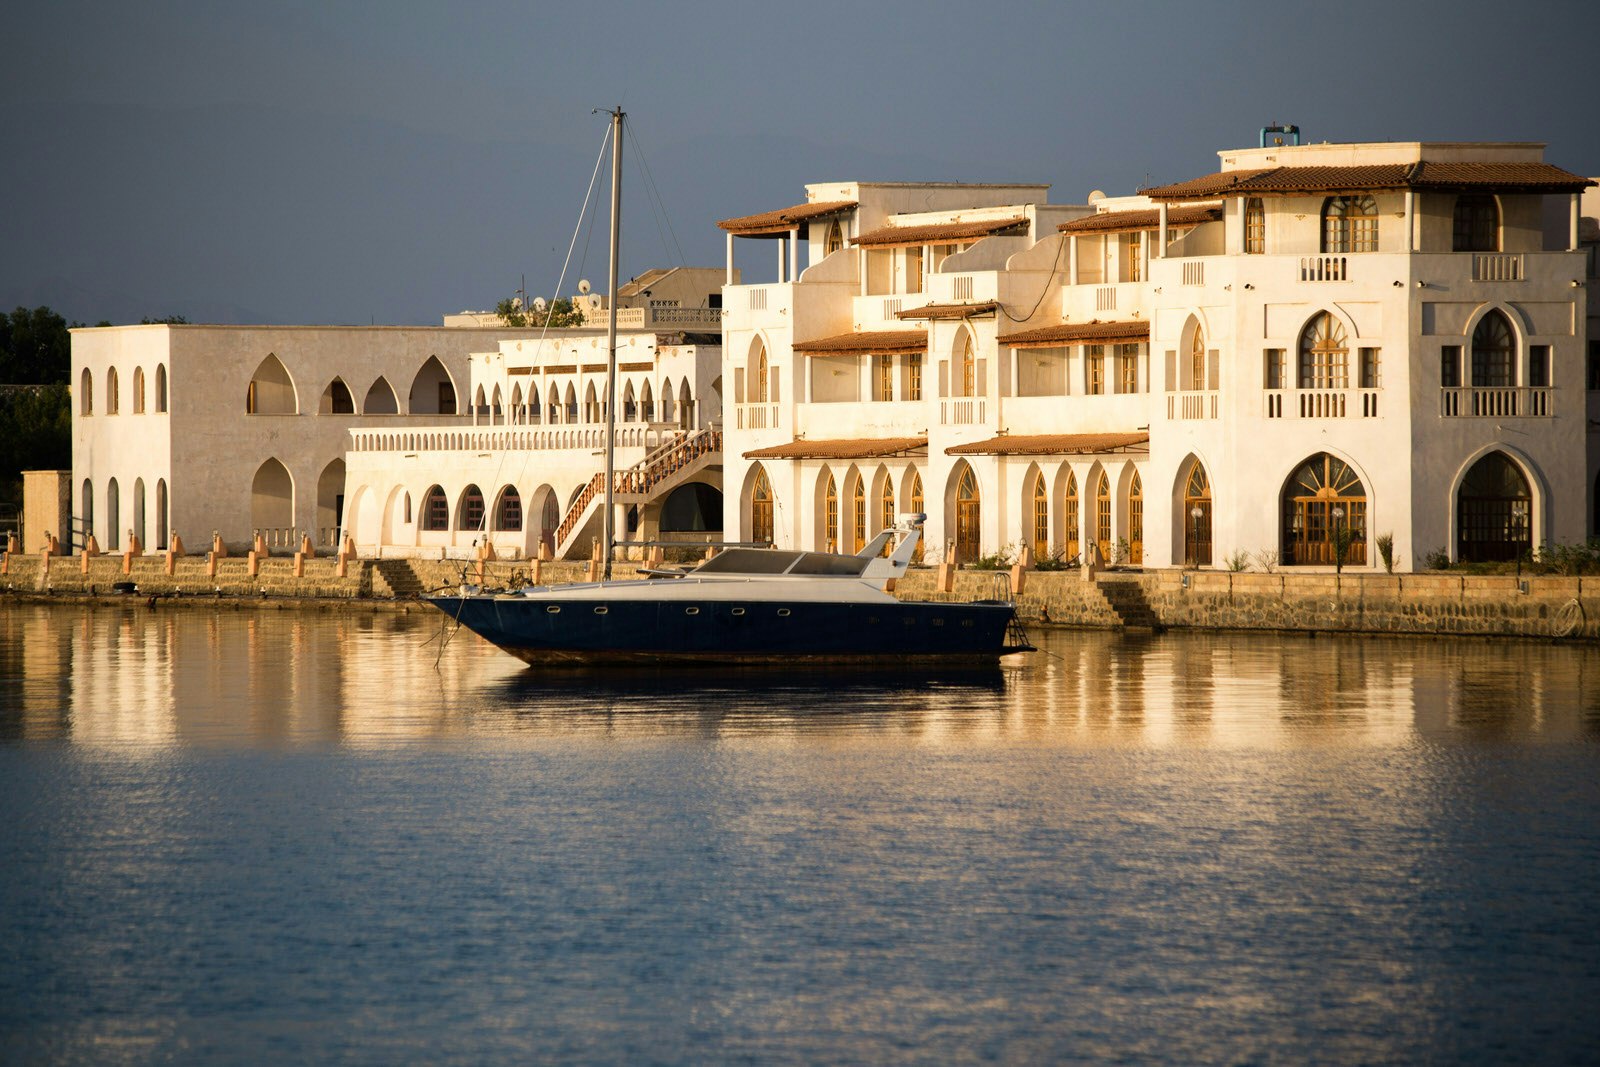 Warm light cast by a setting sun lights a row of three storey, sand-coloured colonial buildings from the Italian era in Massawa, Eritrea - in the foreground are flat waters and a modern powerboat at anchor